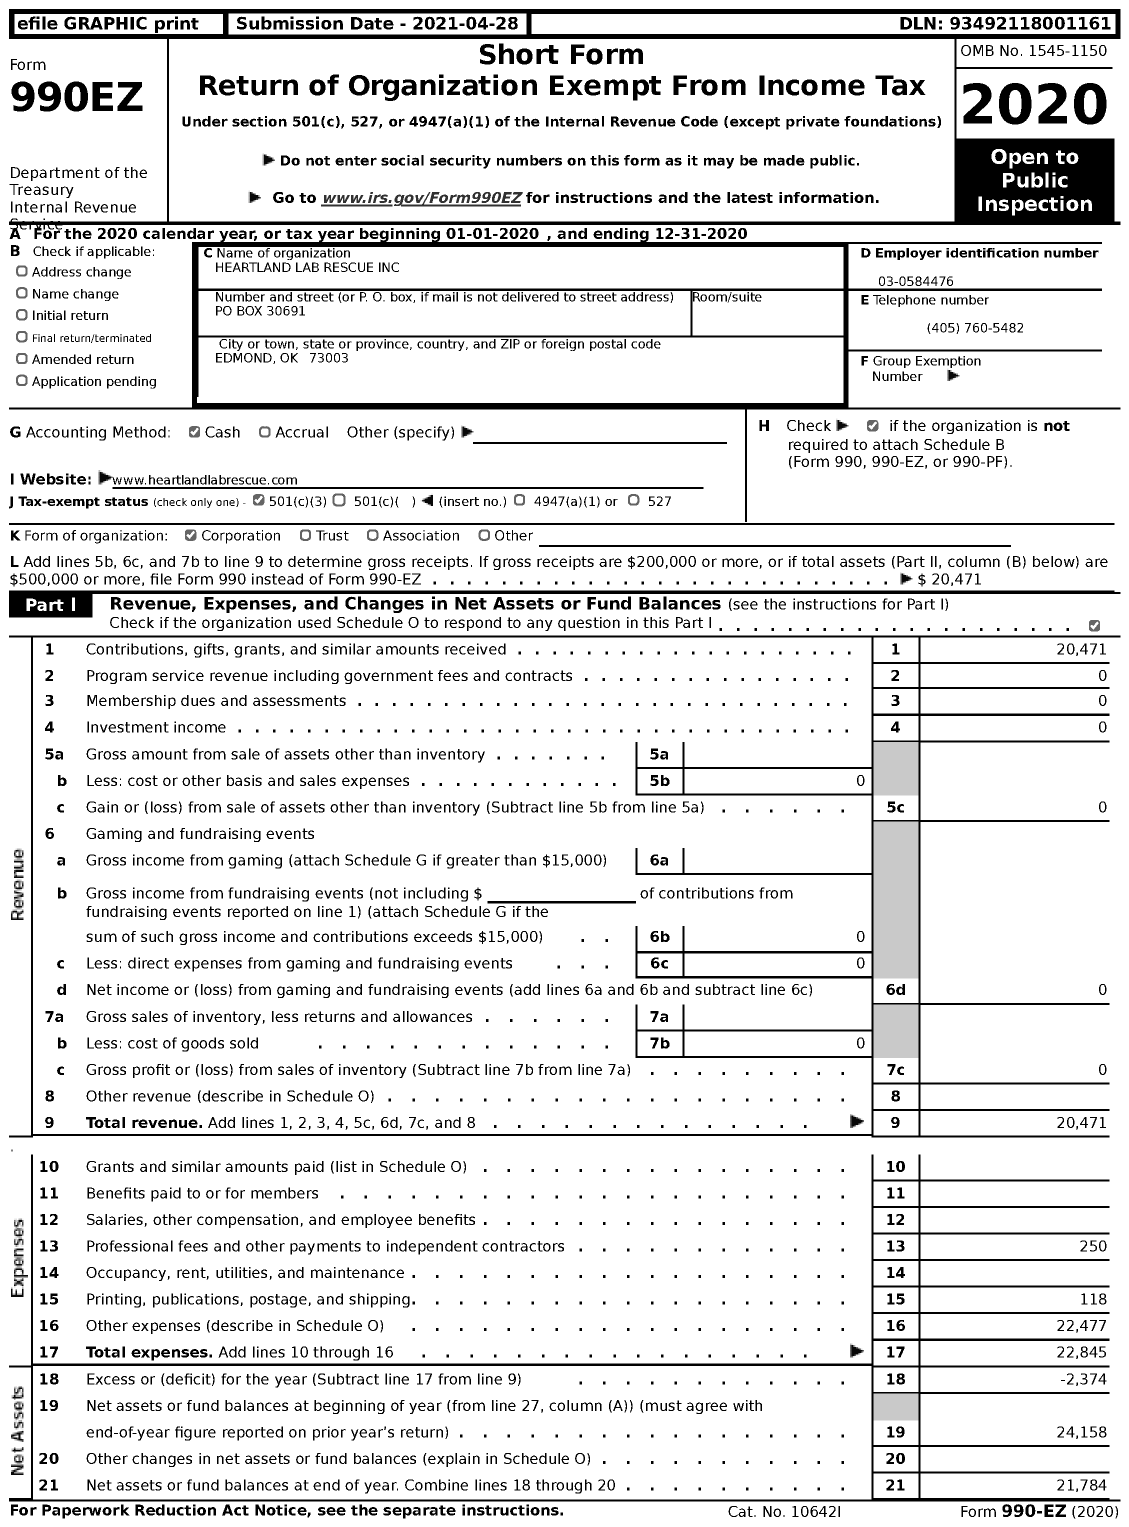 Image of first page of 2020 Form 990EZ for Heartland Lab Rescue